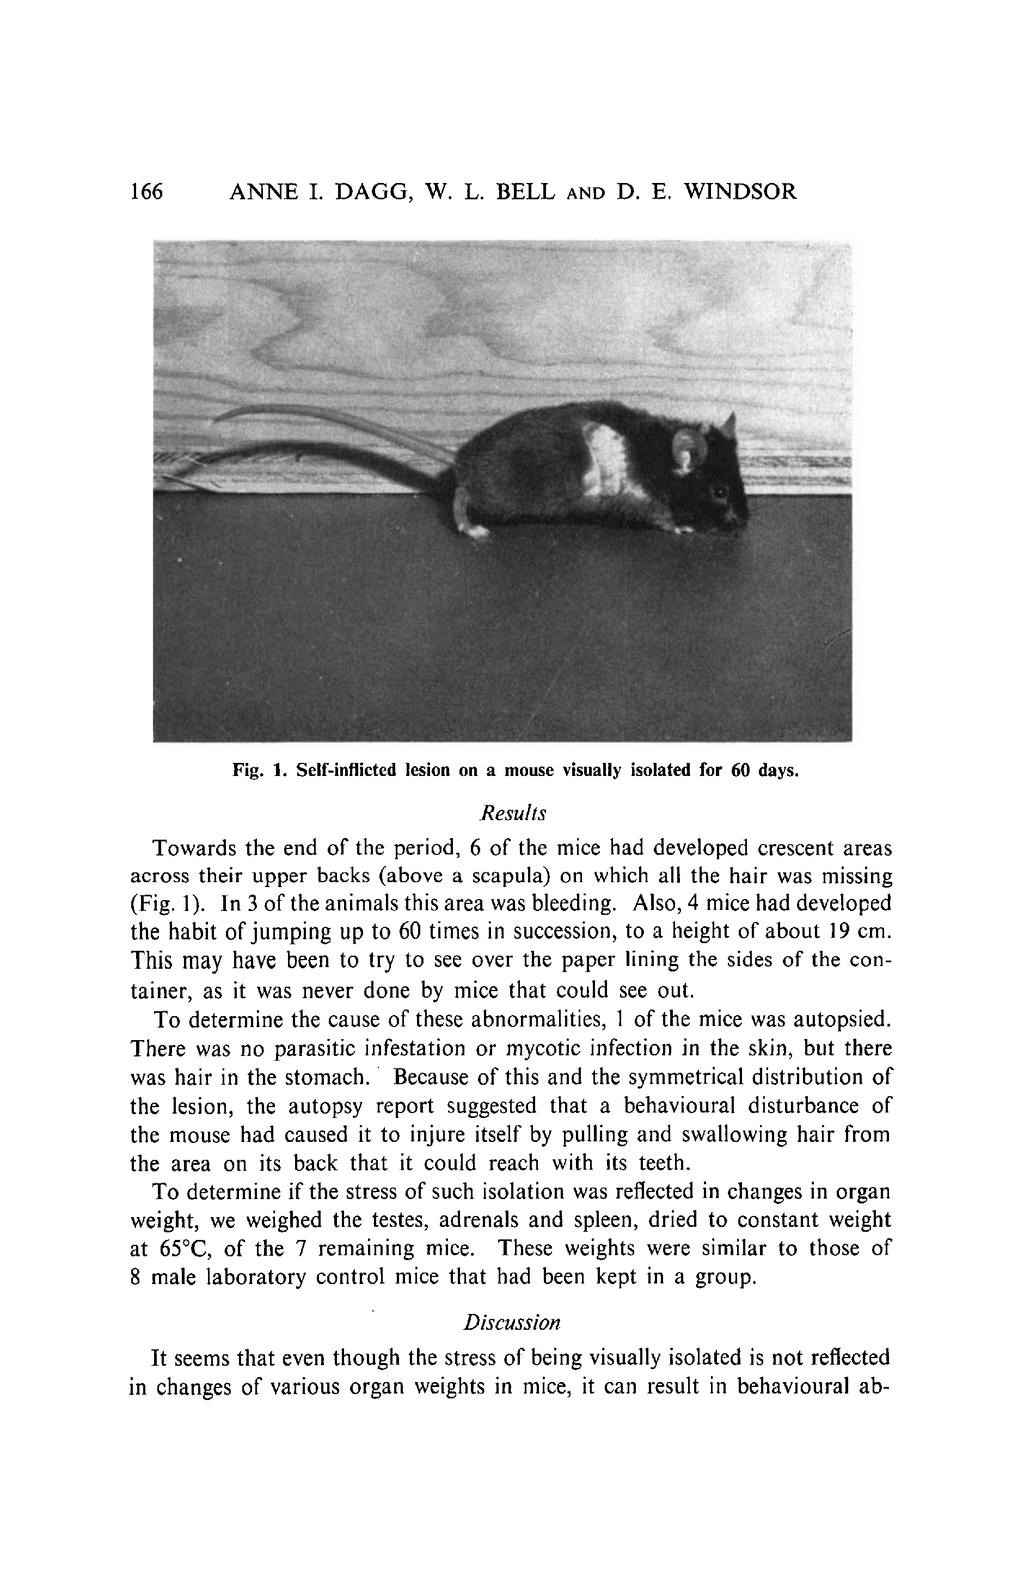 166 ANNE 1. DAGG, W. L. BELL AND D. E. WINDSOR Fig. 1. Self-inflicted lesion on a mouse visually isolated for 60 days.